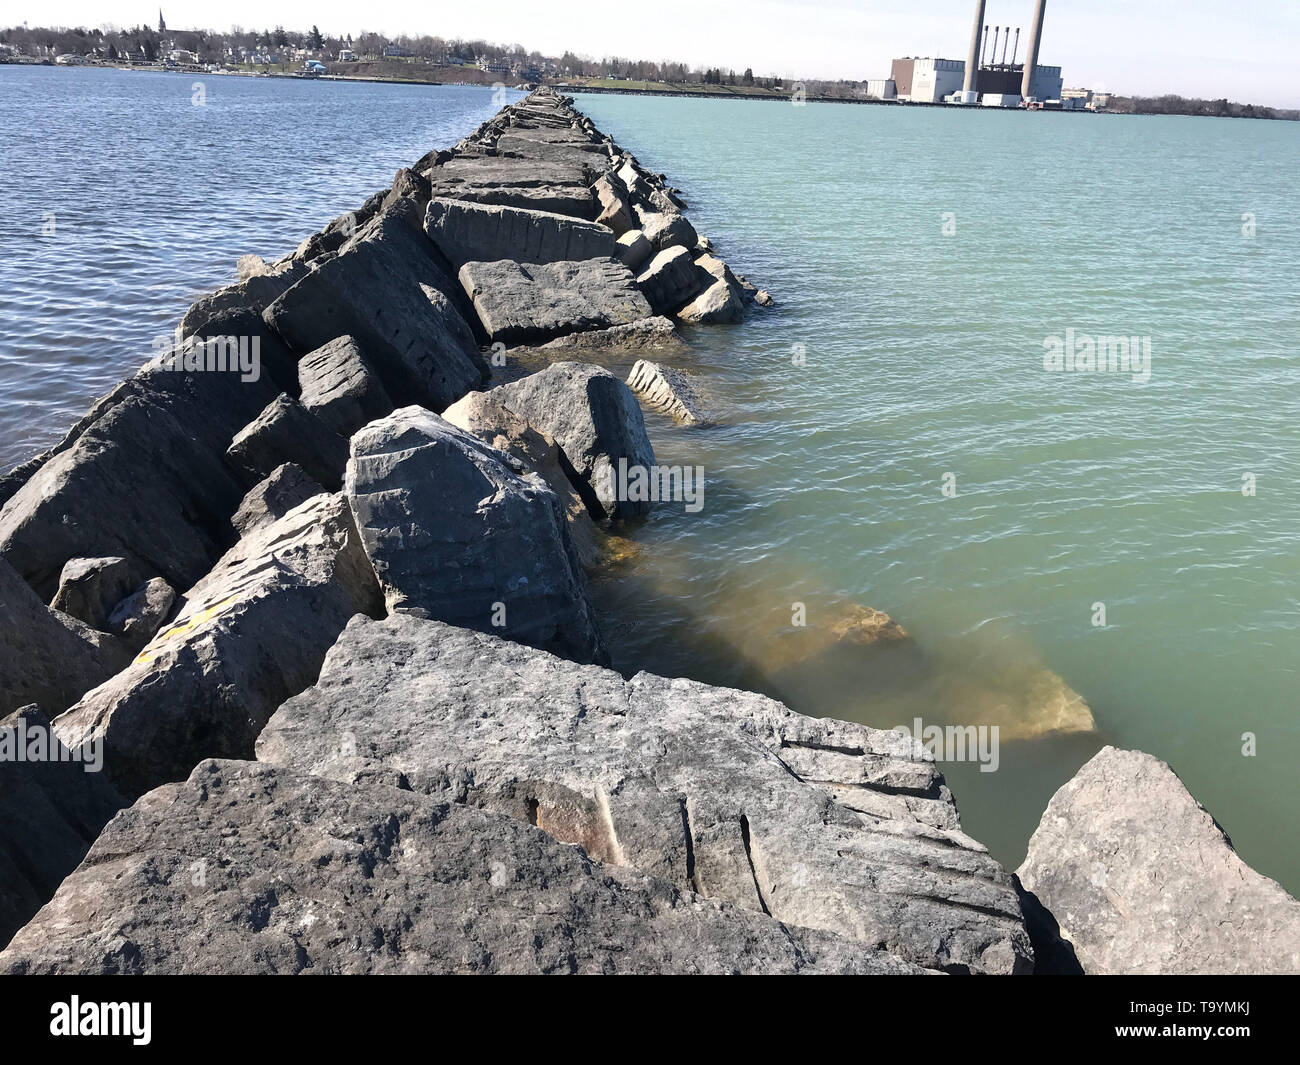 The U.S. Army Corps of Engineers, Buffalo District has awarded a $4.7 million contract to continue repairs on the west arrowhead breakwater located at the Port of Oswego, Oswego, New York.  This photograph was taken of the area that needs repair by Buffalo District technical teams. April 17, 2019, Oswego, NY. Stock Photo